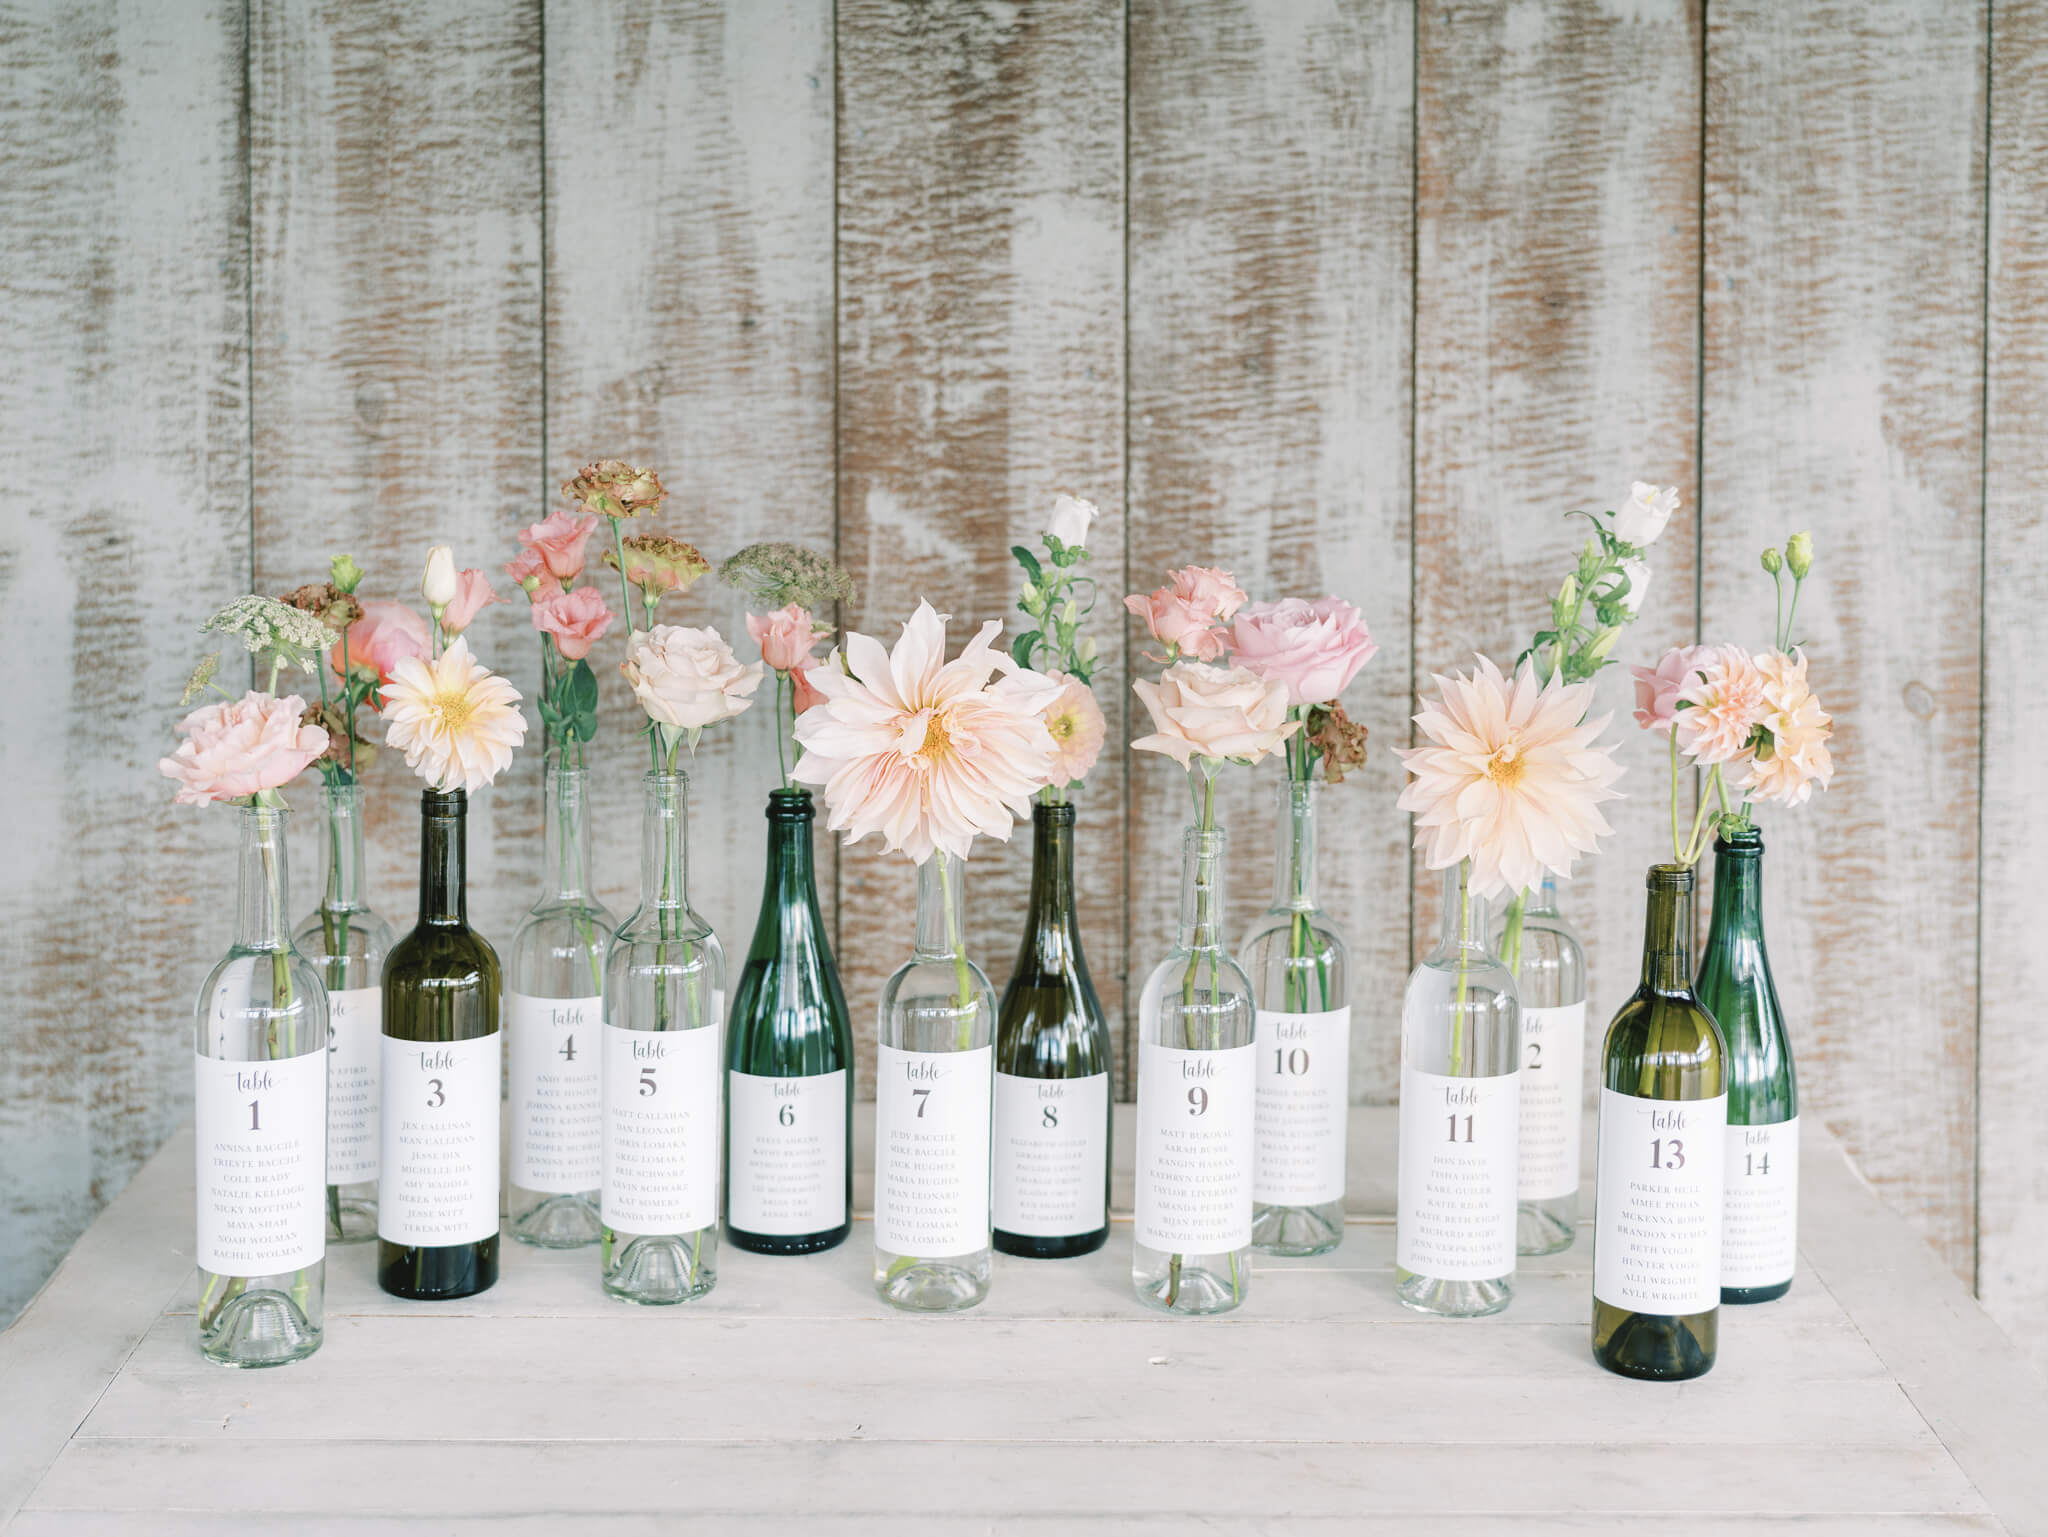 A seating display made of green, brown and clear wine bottles with white labels and peach blush dahlias and roses at Pippin Hill Vineyards.